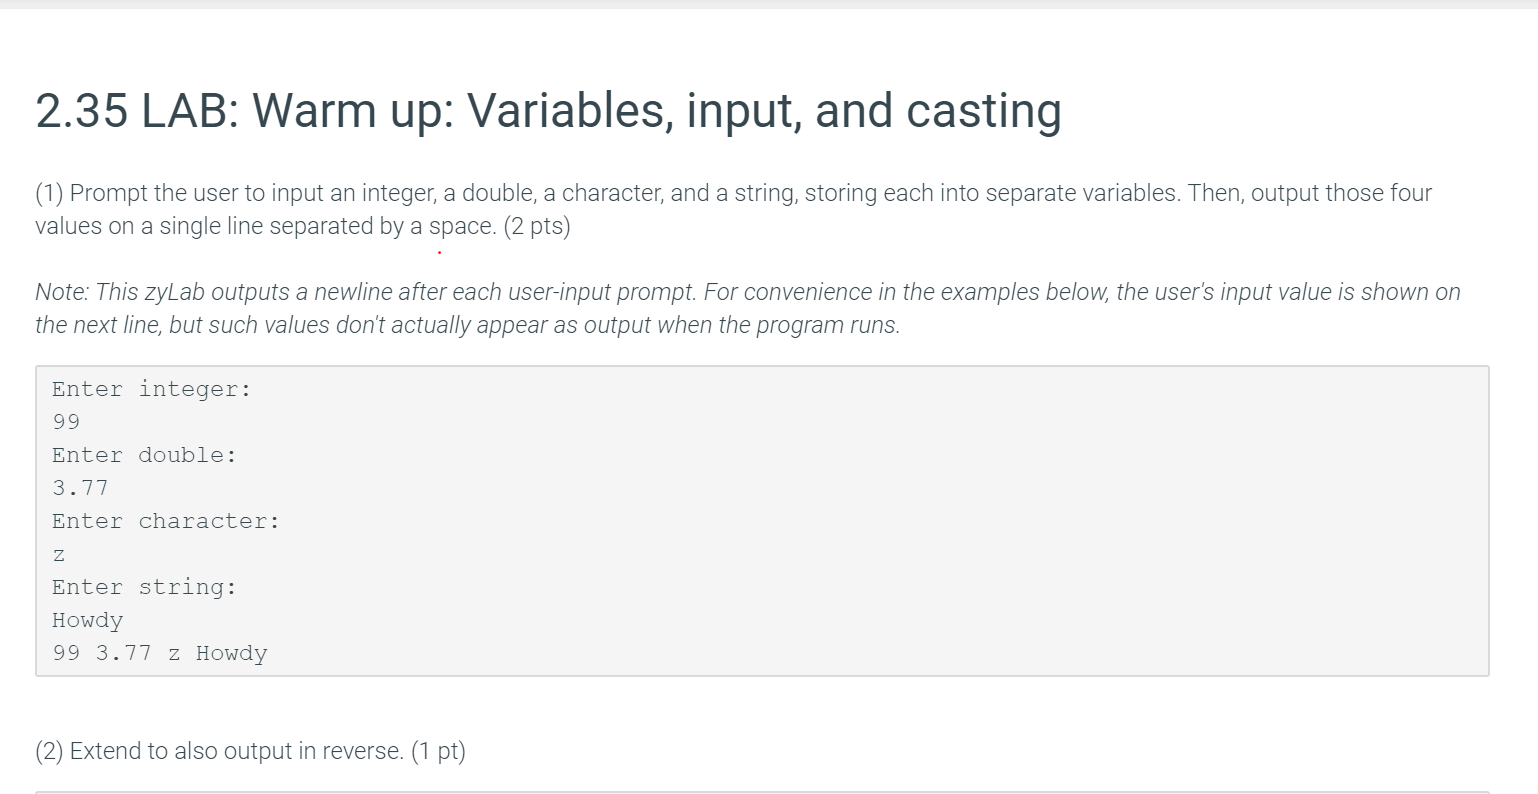 2.35 lab: warm up: variables, input, and casting (1) prompt the user to input an integer, a double, a character, and a string